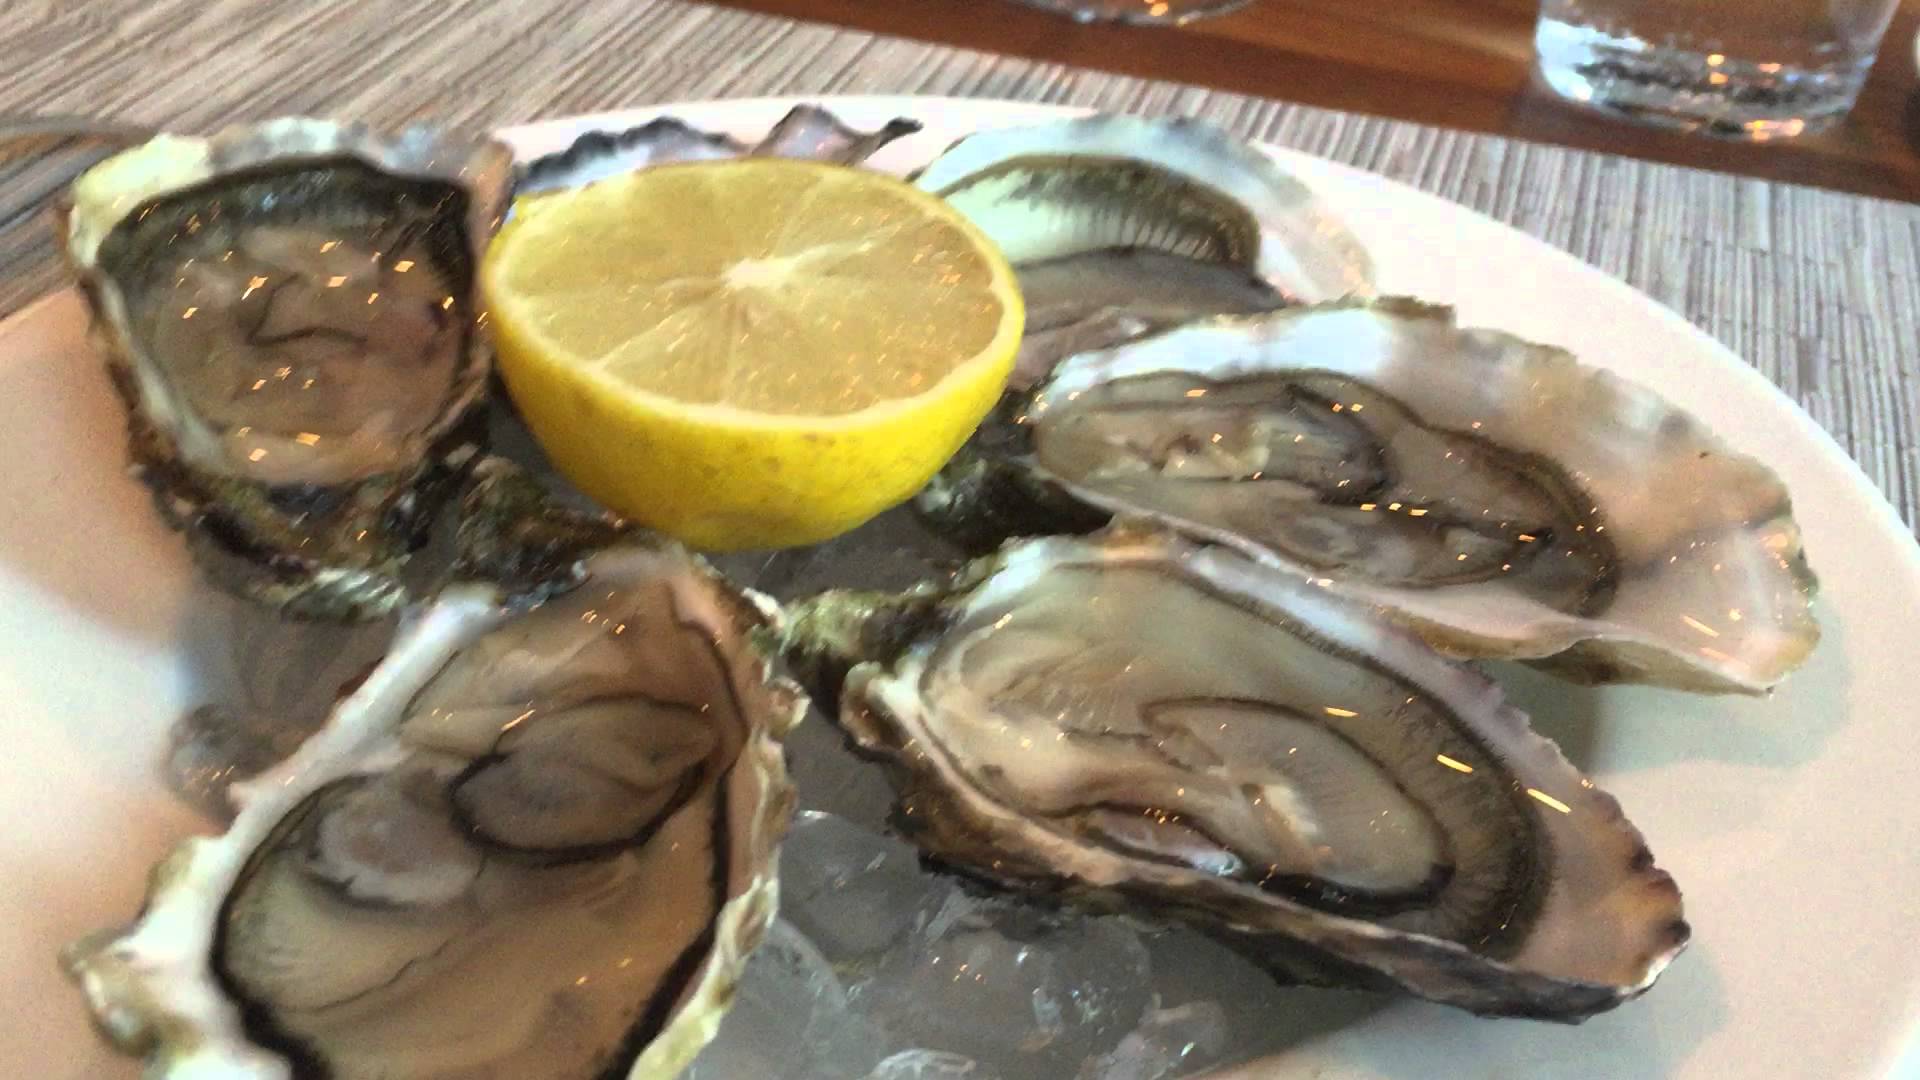 Oysters in France - A nice Plate with Oysters - Wine and fresh Bread ...